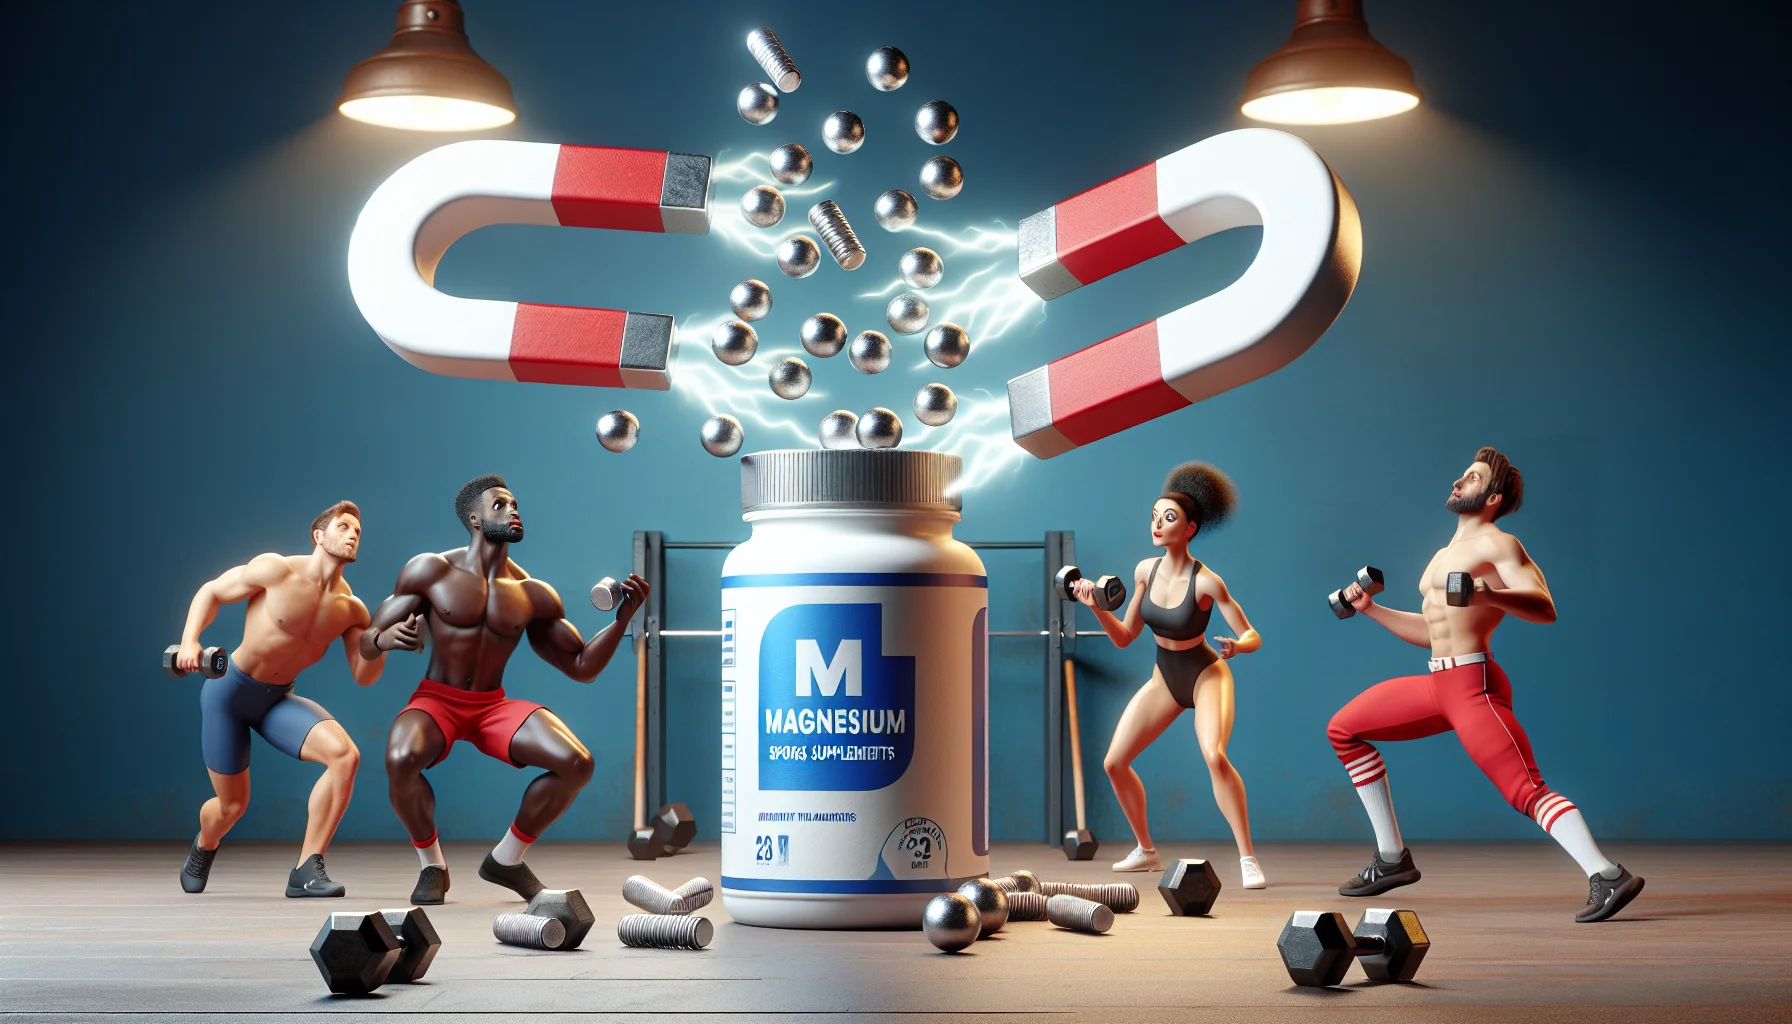 Show a quirky, engaging scenario where powerful magnets are being attracted to a bottle of magnesium sports supplements. The magnets hover mid-air, their force visibly pulling them towards the bottle. On the sides, a couple of confused athletes, a Black female gymnast, and a Caucasian male baseball player, watch the spectacle, their dropped dumbbells implying the interrupted workout. The scenario seems surreal but funny, creating a compelling, humorous idea about the magnetic properties of magnesium supplements.